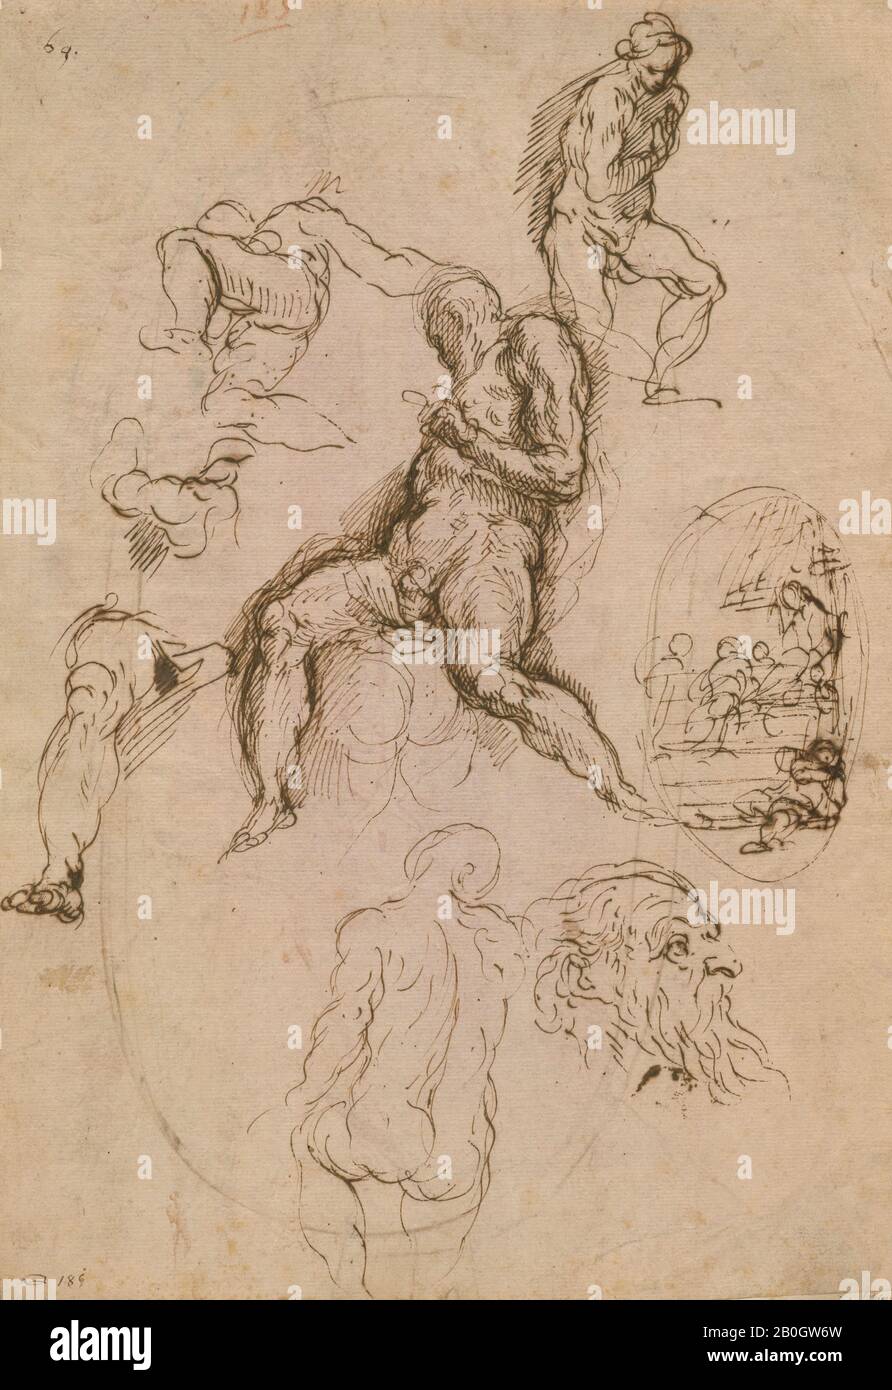 Jacopo Palma, il giovane, Italian, c. 1548–1648, Sheet of Studies for Painting in the Salone del Maggior Consiglio, Ducal Palace, Venice, c. 1578, Pen and brown ink on laid paper, Overall: 11 13/16 x 8 1/8 in. (30 x 20.7 cm Stock Photo